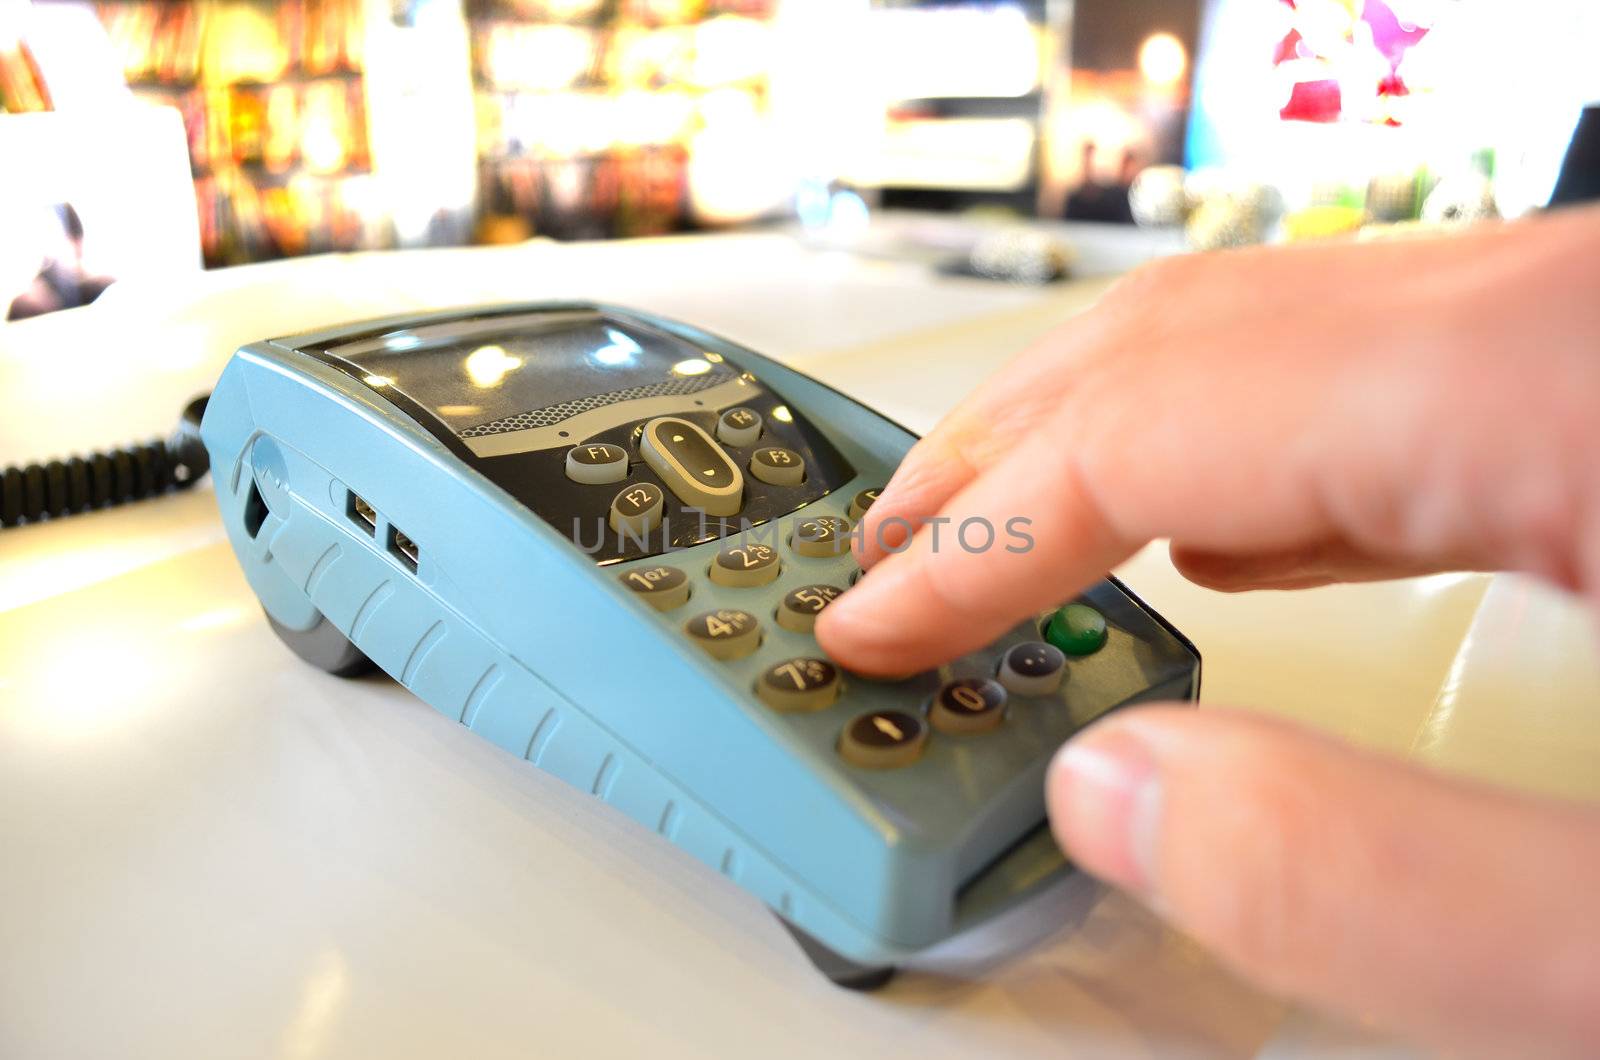 POS payment in a shop by artofphoto